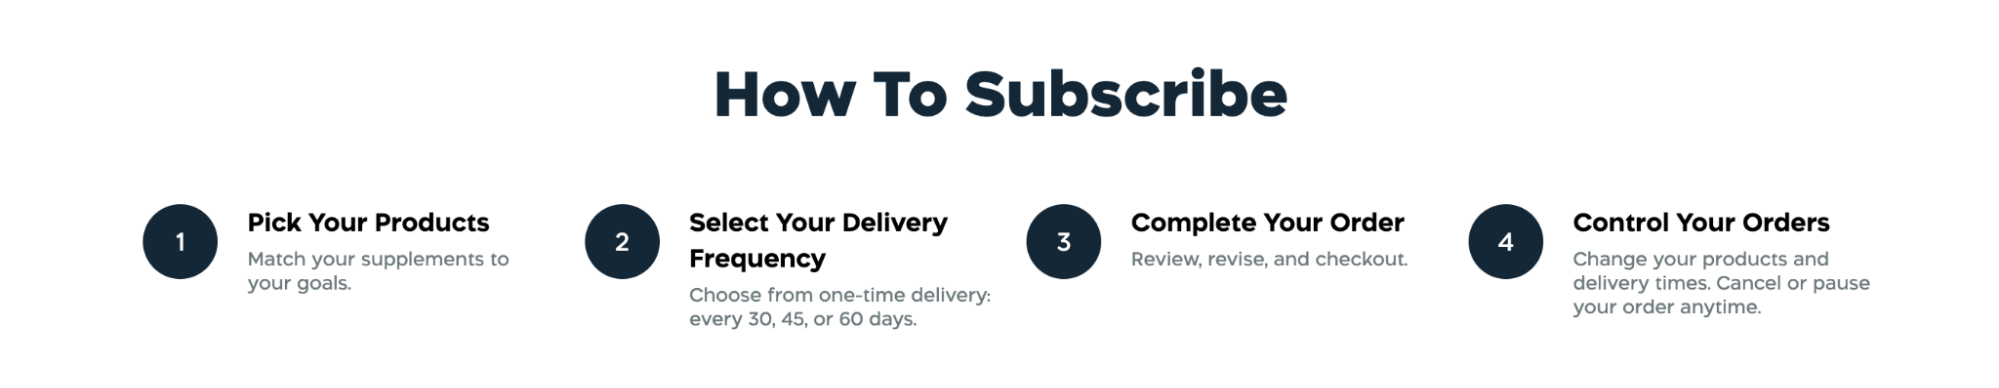 Ease of subscription